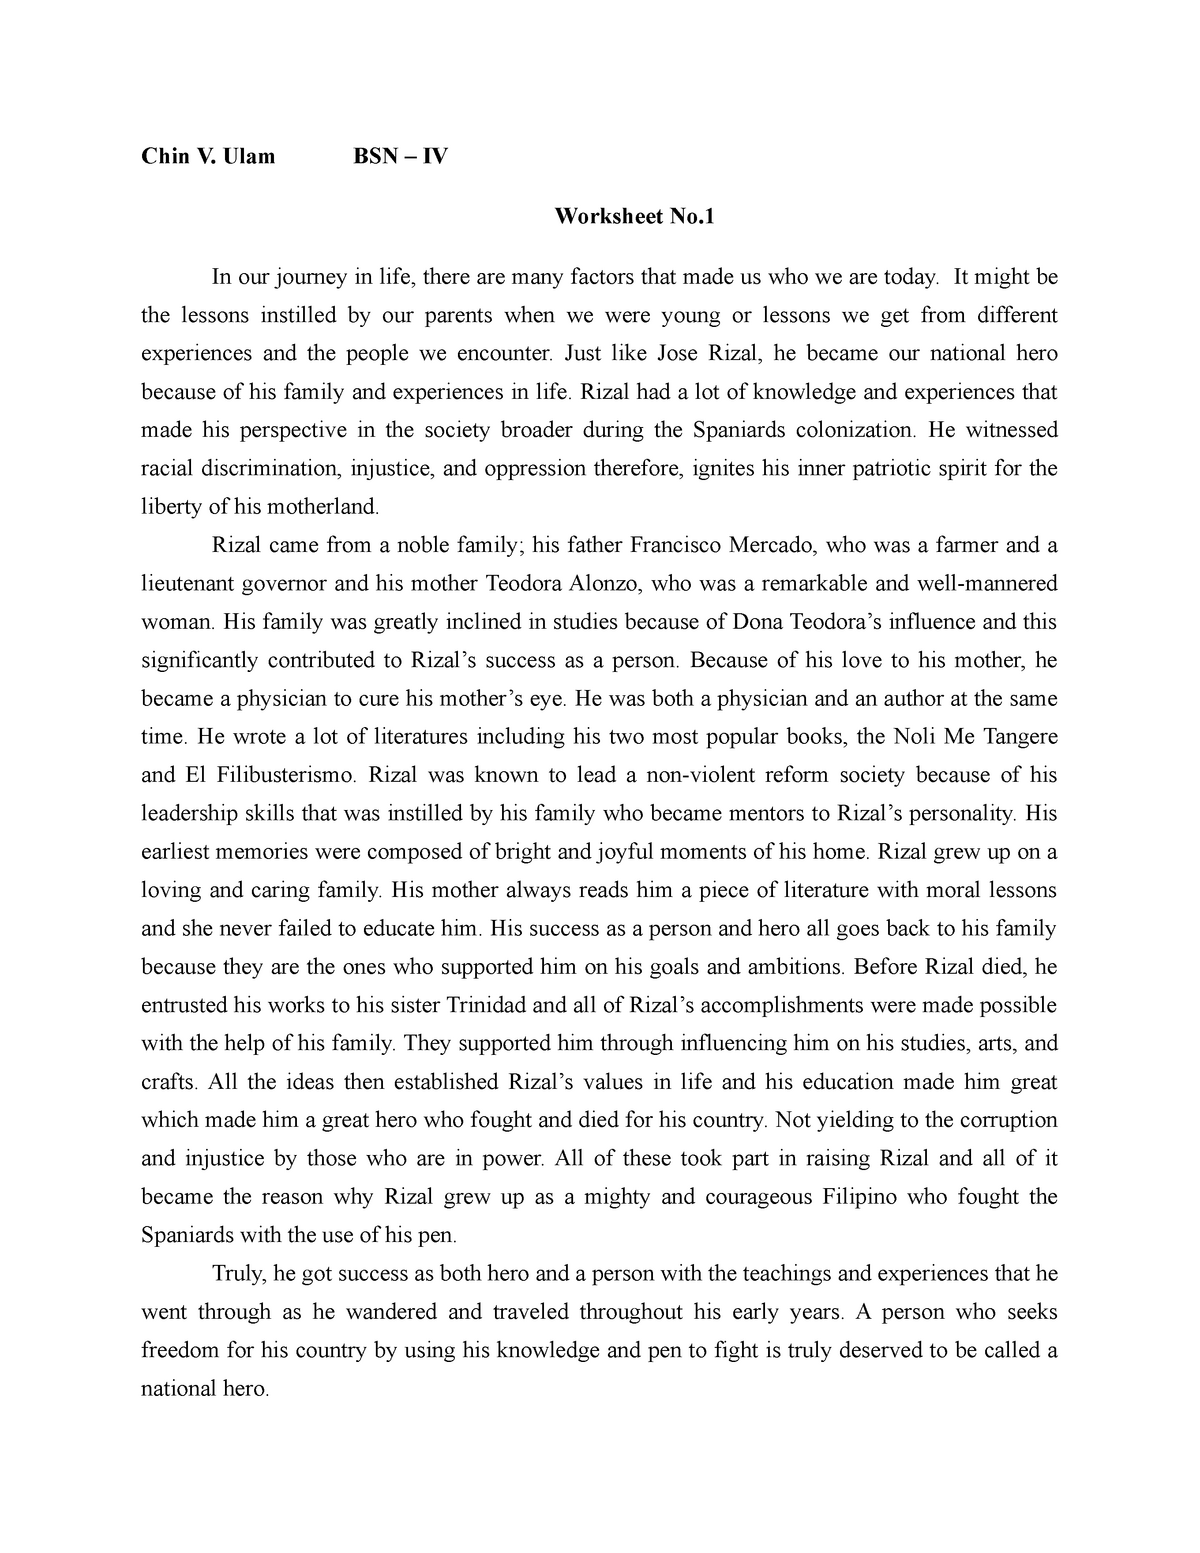 essay about the family of rizal